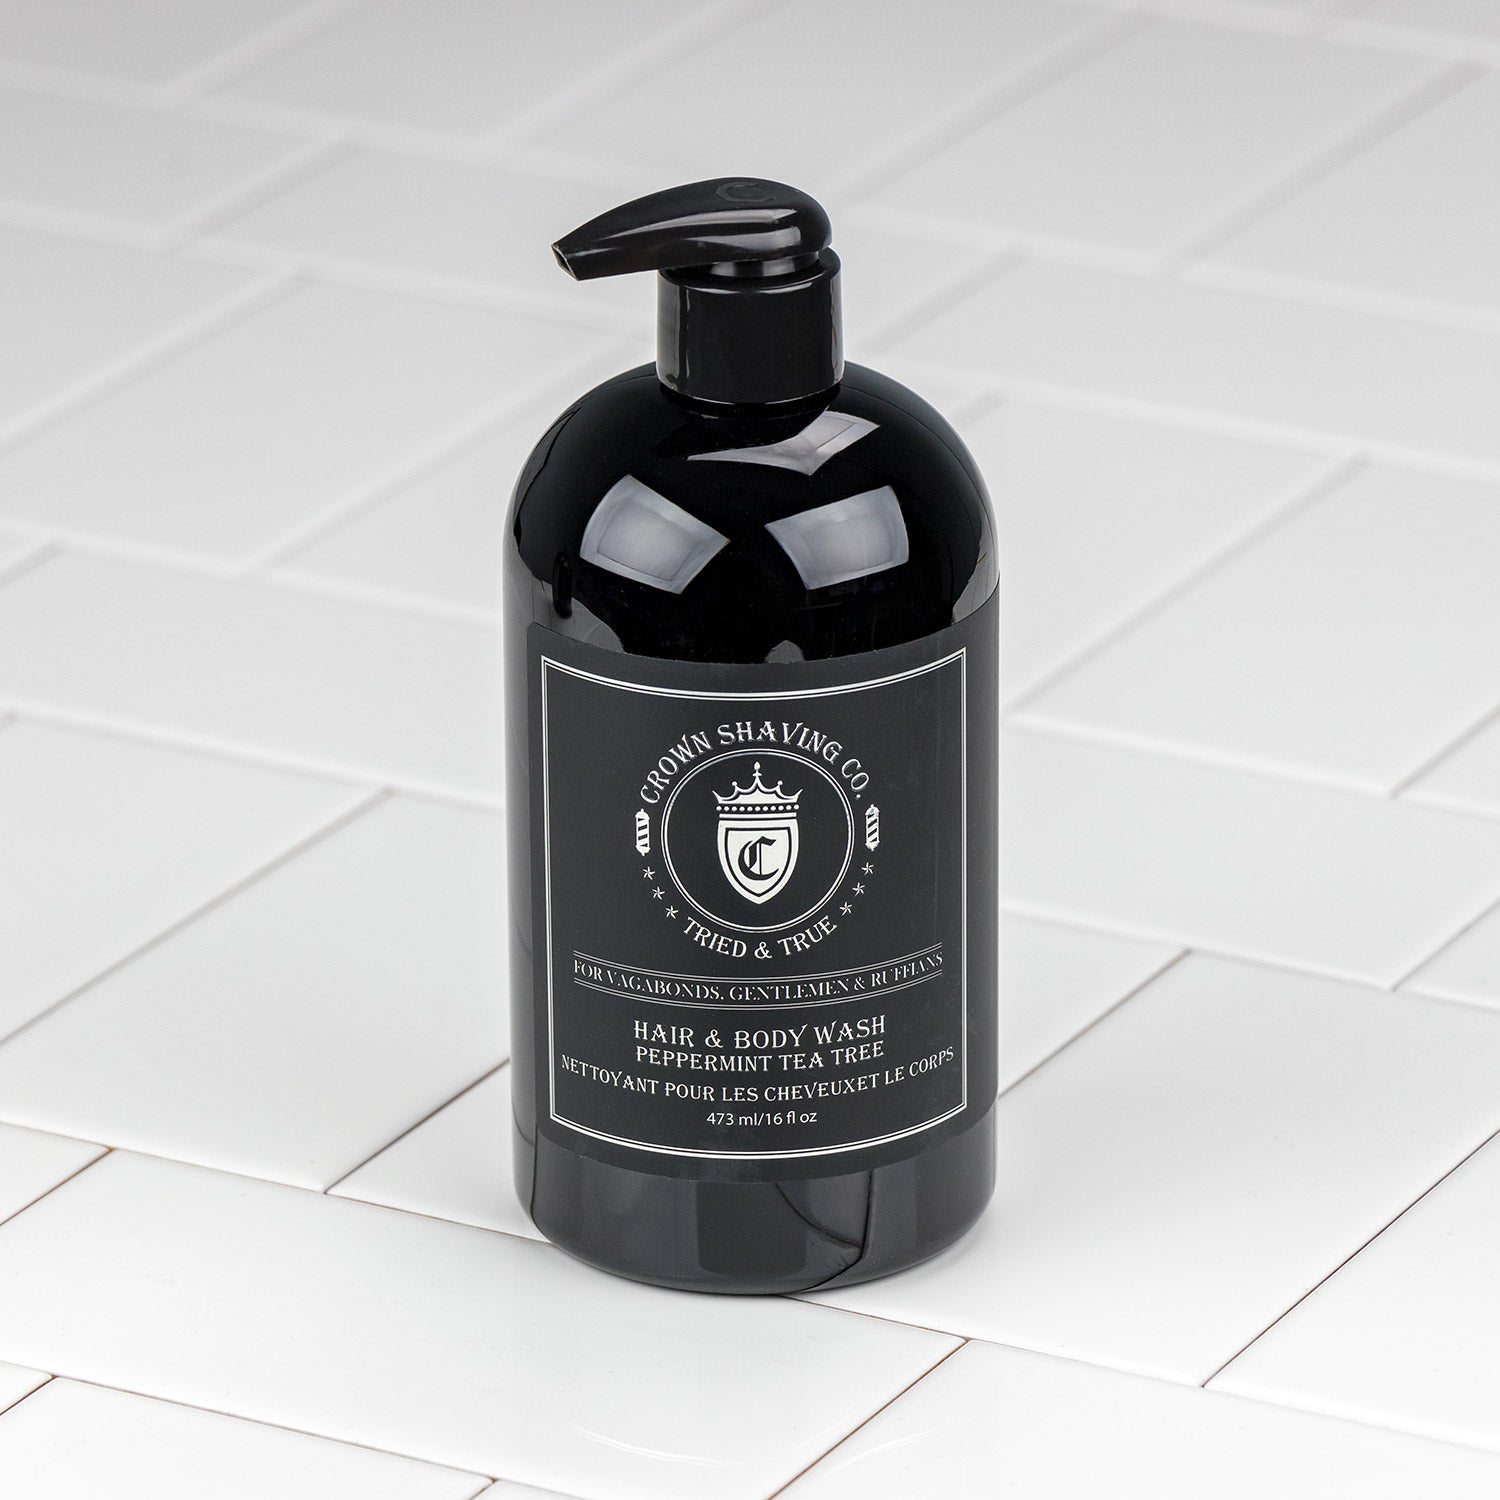 Crown Shaving Co. Hair and Body Wash - Peppermint & Tea Tree Oil